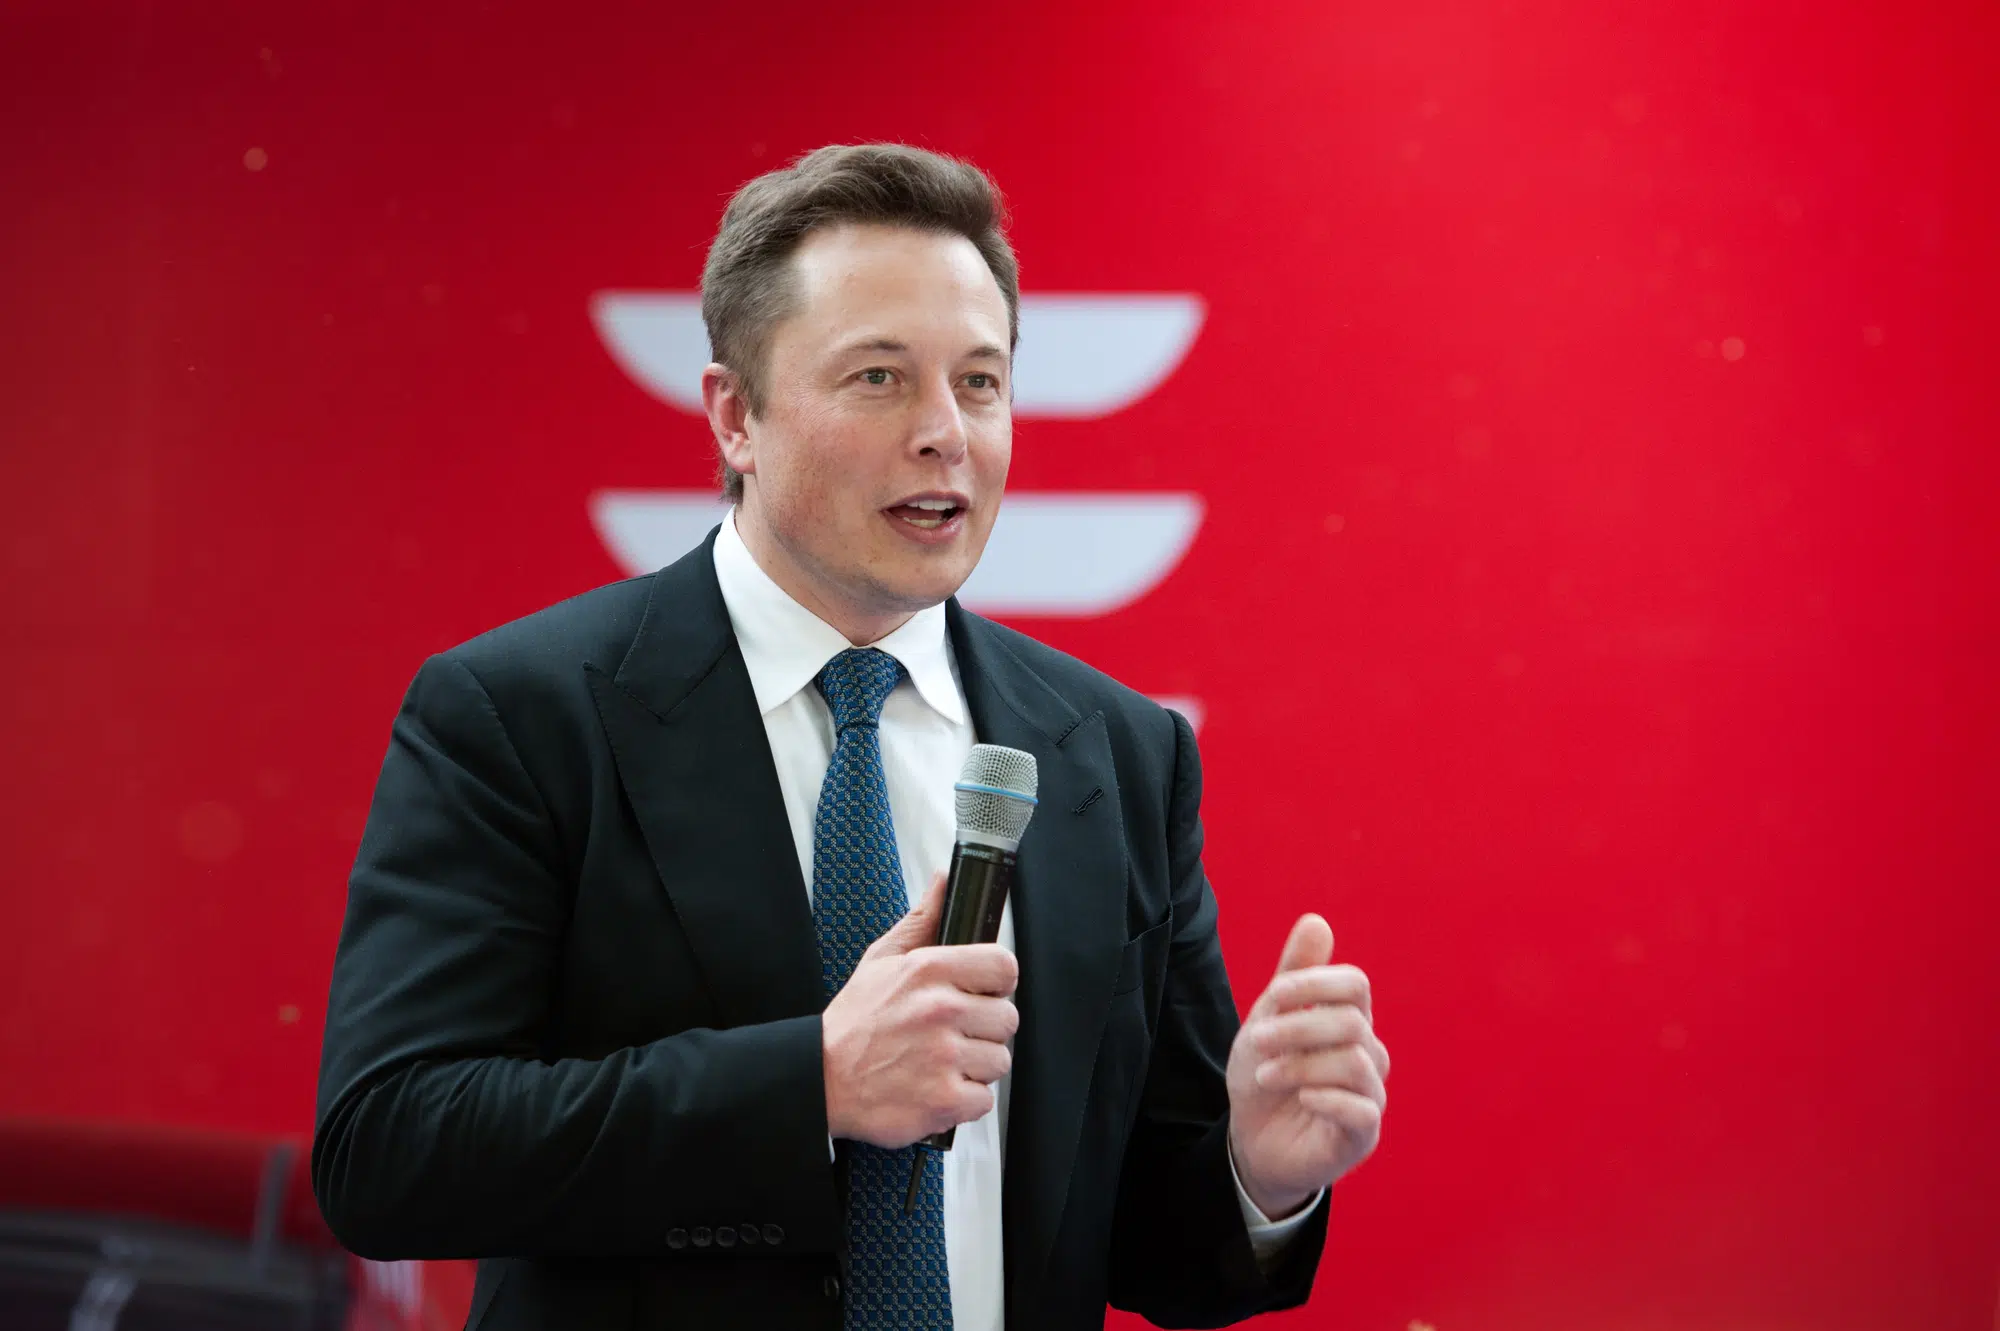 Tesla CEO Elon Musk speaks during a delivery ceremony for the first Model S electric cars in China in Beijing, China, 22 April 2014. Tesla Motors Inc. delivered its first eight electric cars to customers in China on Tuesday (22 April 2014) and CEO Elon Musk said the company will build a nationwide network of charging stations and service centers as fast as it can. Tesla probably will invest several hundred million dollars in charging infrastructure in China, Musk told reporters. He said it will open several hundred service centers. Customers received the first Model S sedans at a brief ceremony at Teslas office in a Beijing industrial park, also the site of its first Chinese charging station.